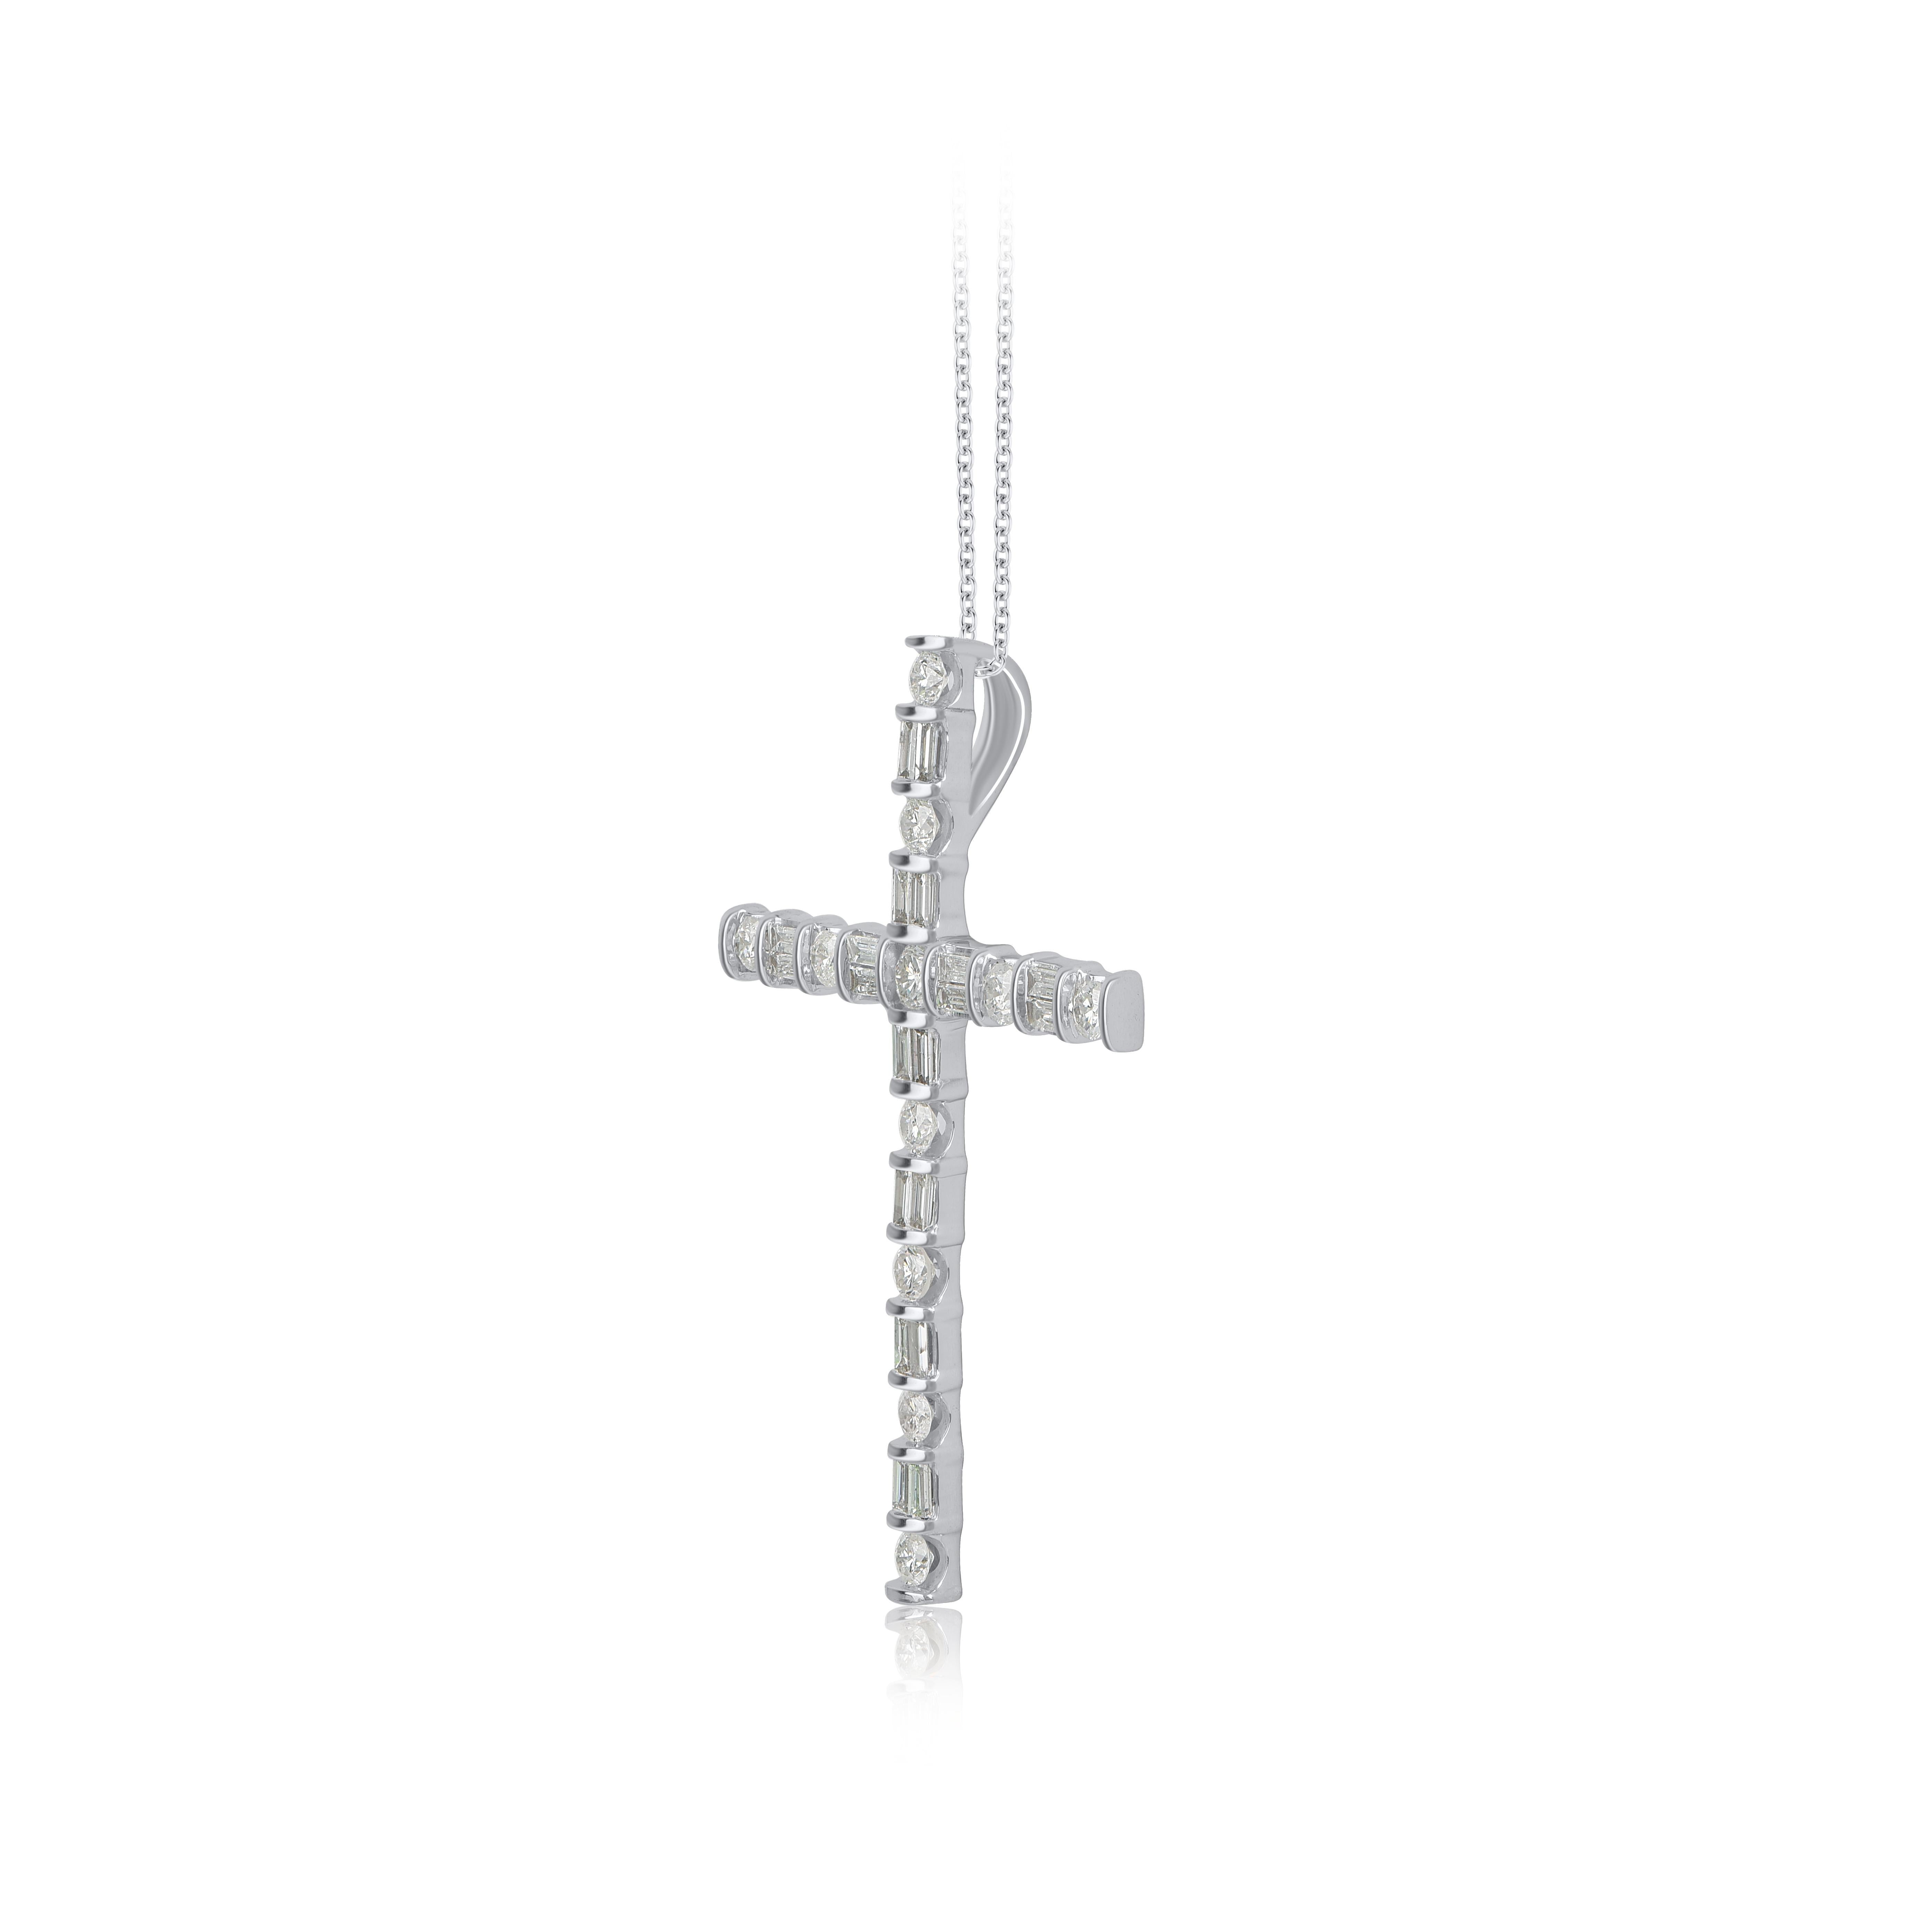 Make a bold statement of style and beliefs with the eye-catching elegance of this diamond cross pendant. Beautifully crafted by our inhouse experts in 14 karat white gold and embellished with 31 round brilliant cut & baguette cut diamond set in nic